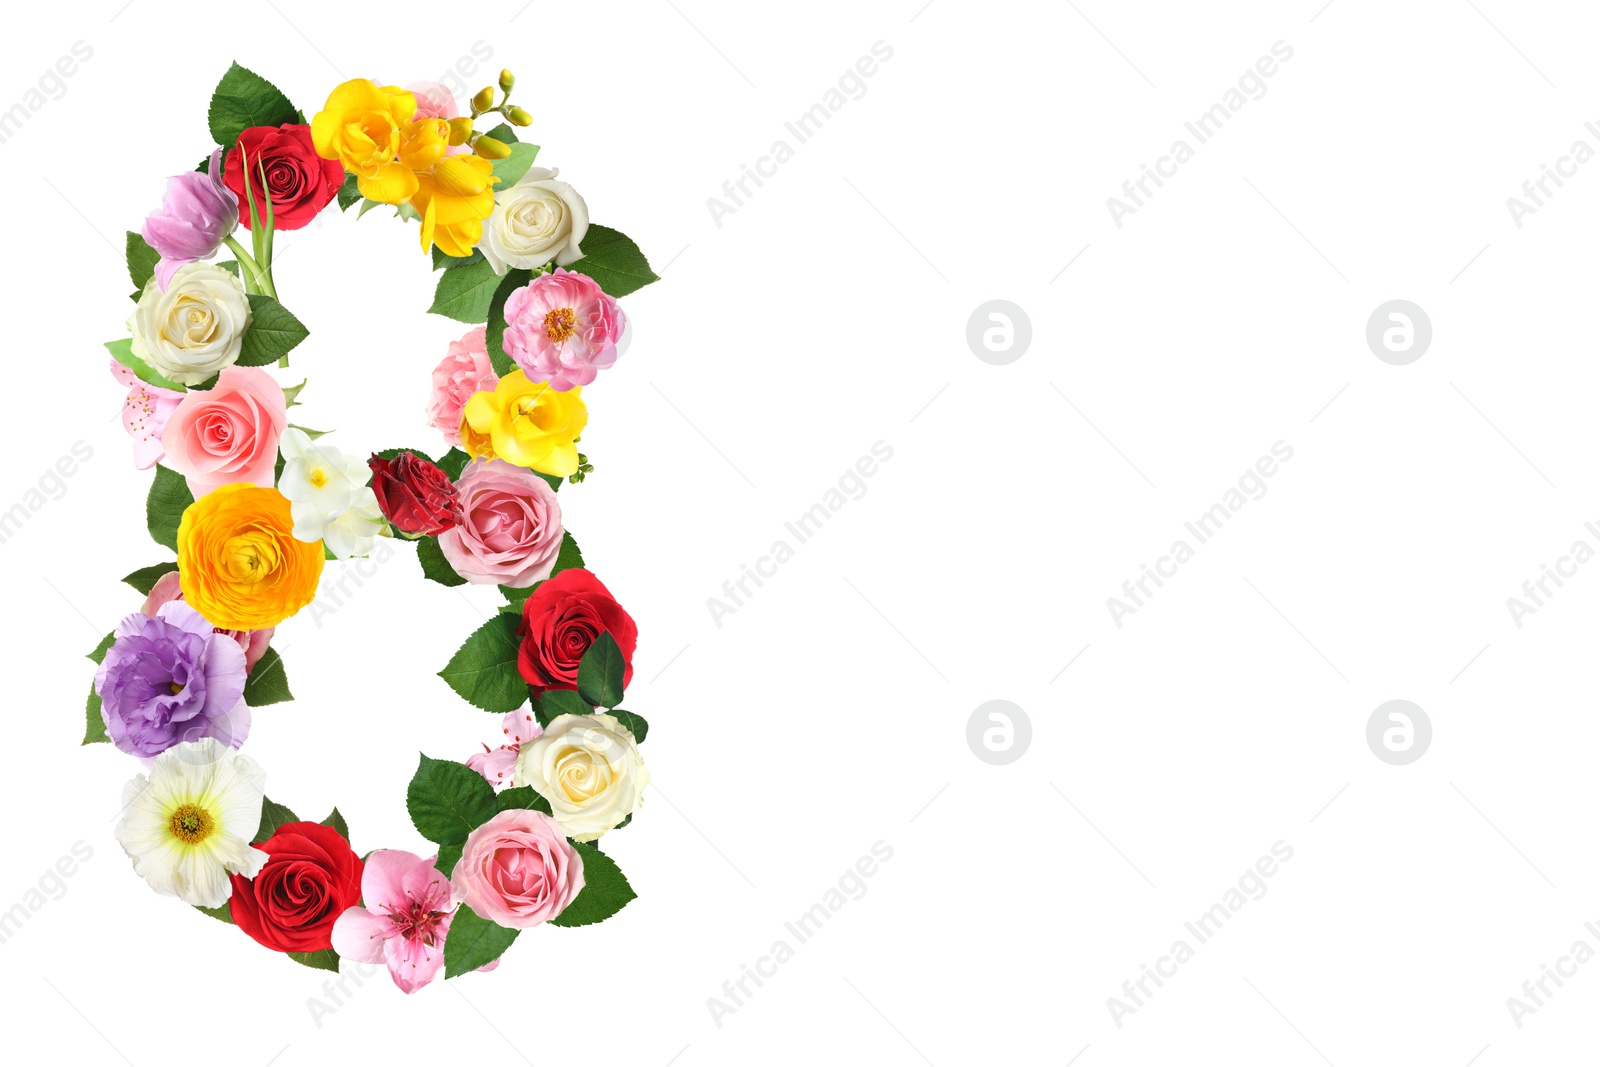 Image of International Women's Day - March 8. Card design with number 8 of bright flowers and leaves on white background. Space for text